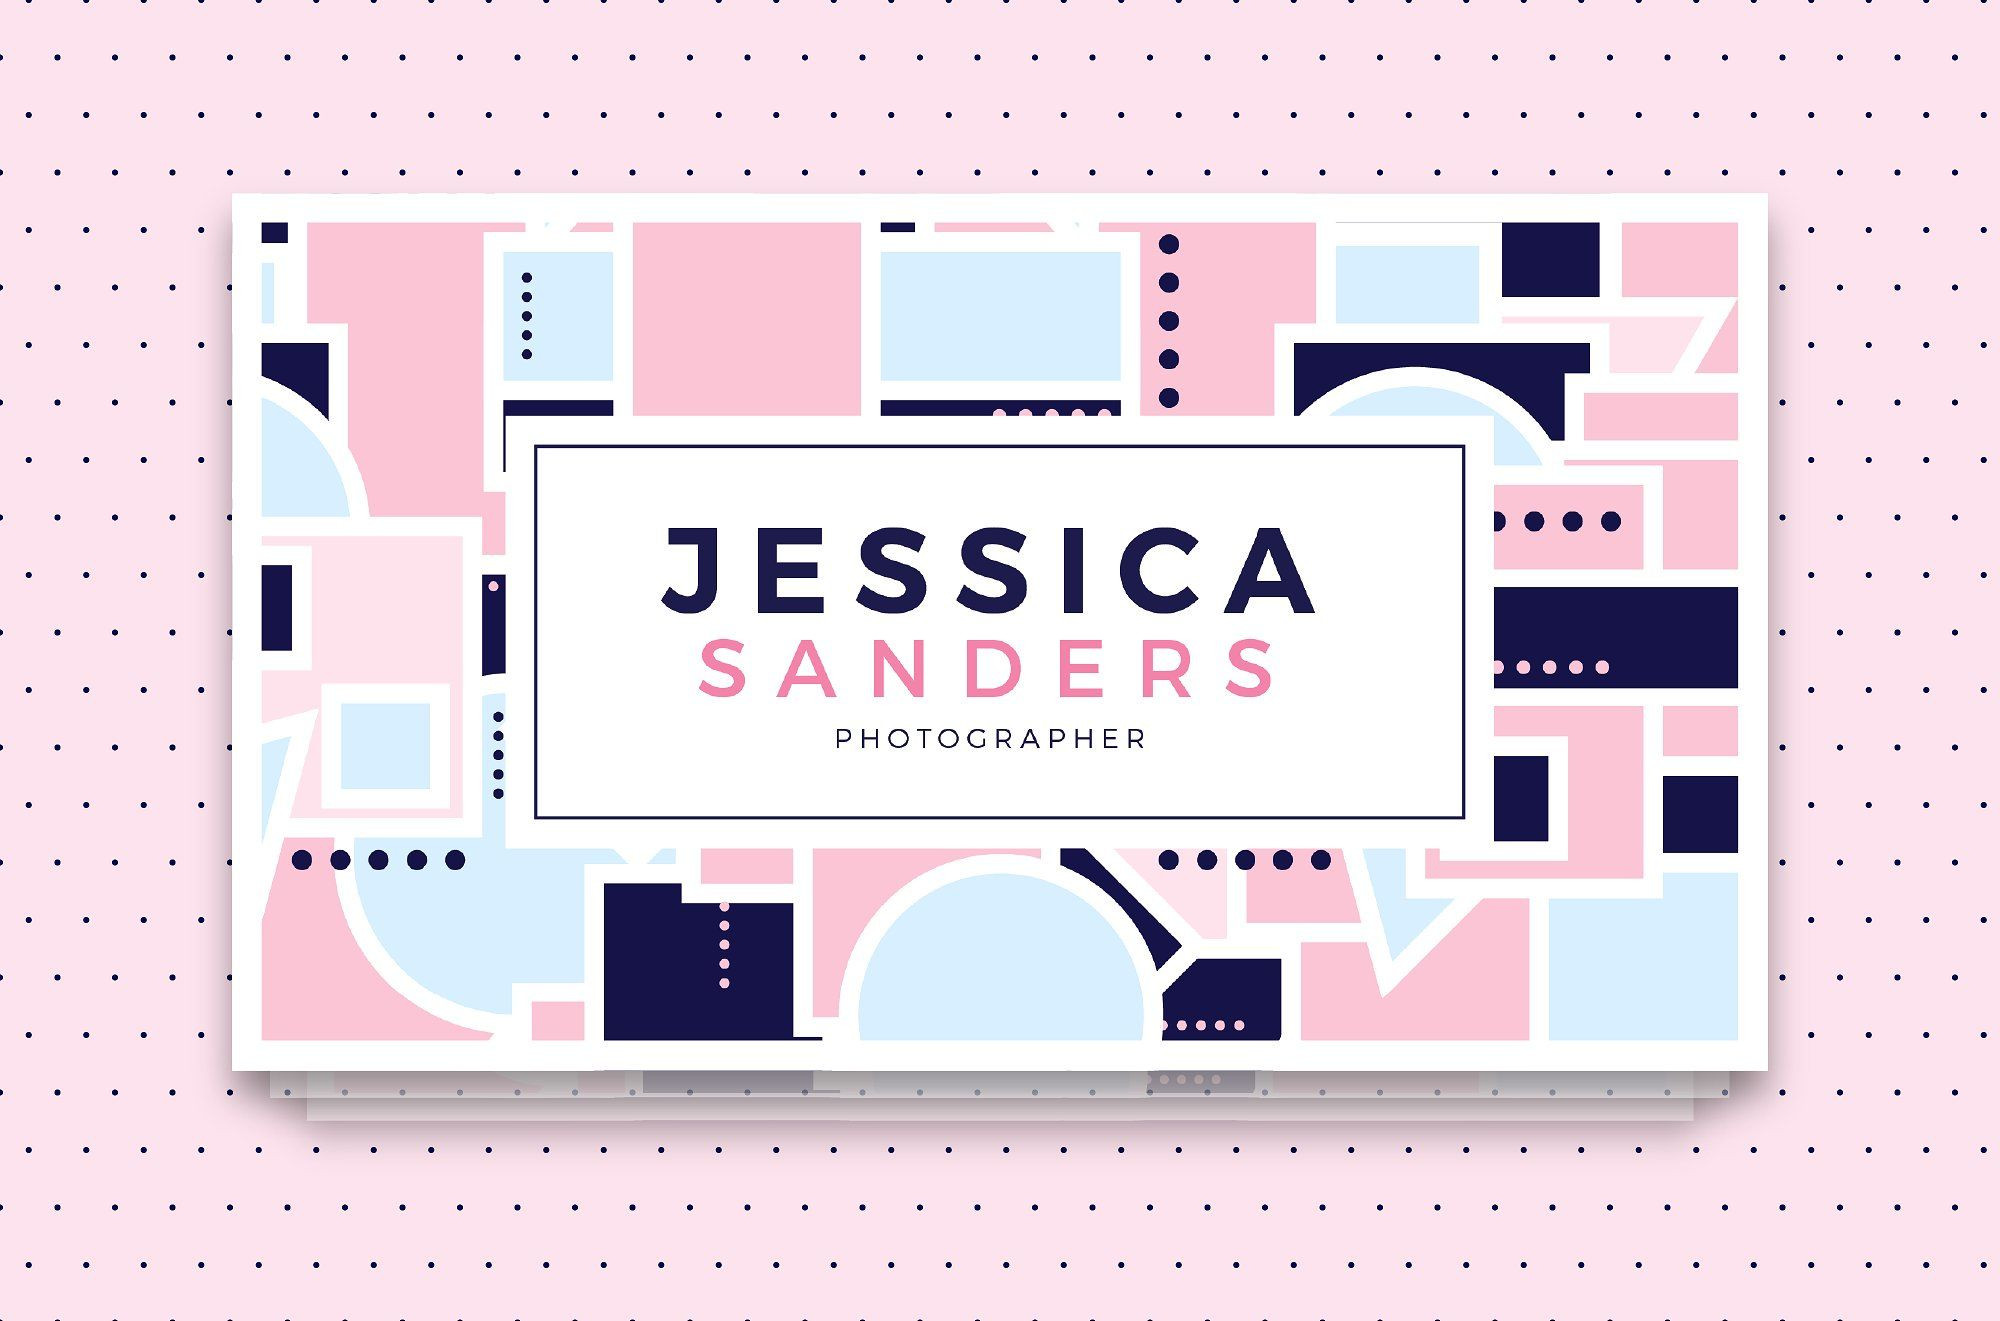 Jessica Sanders Business Card by D Of Free Business Card Templates for Photographers